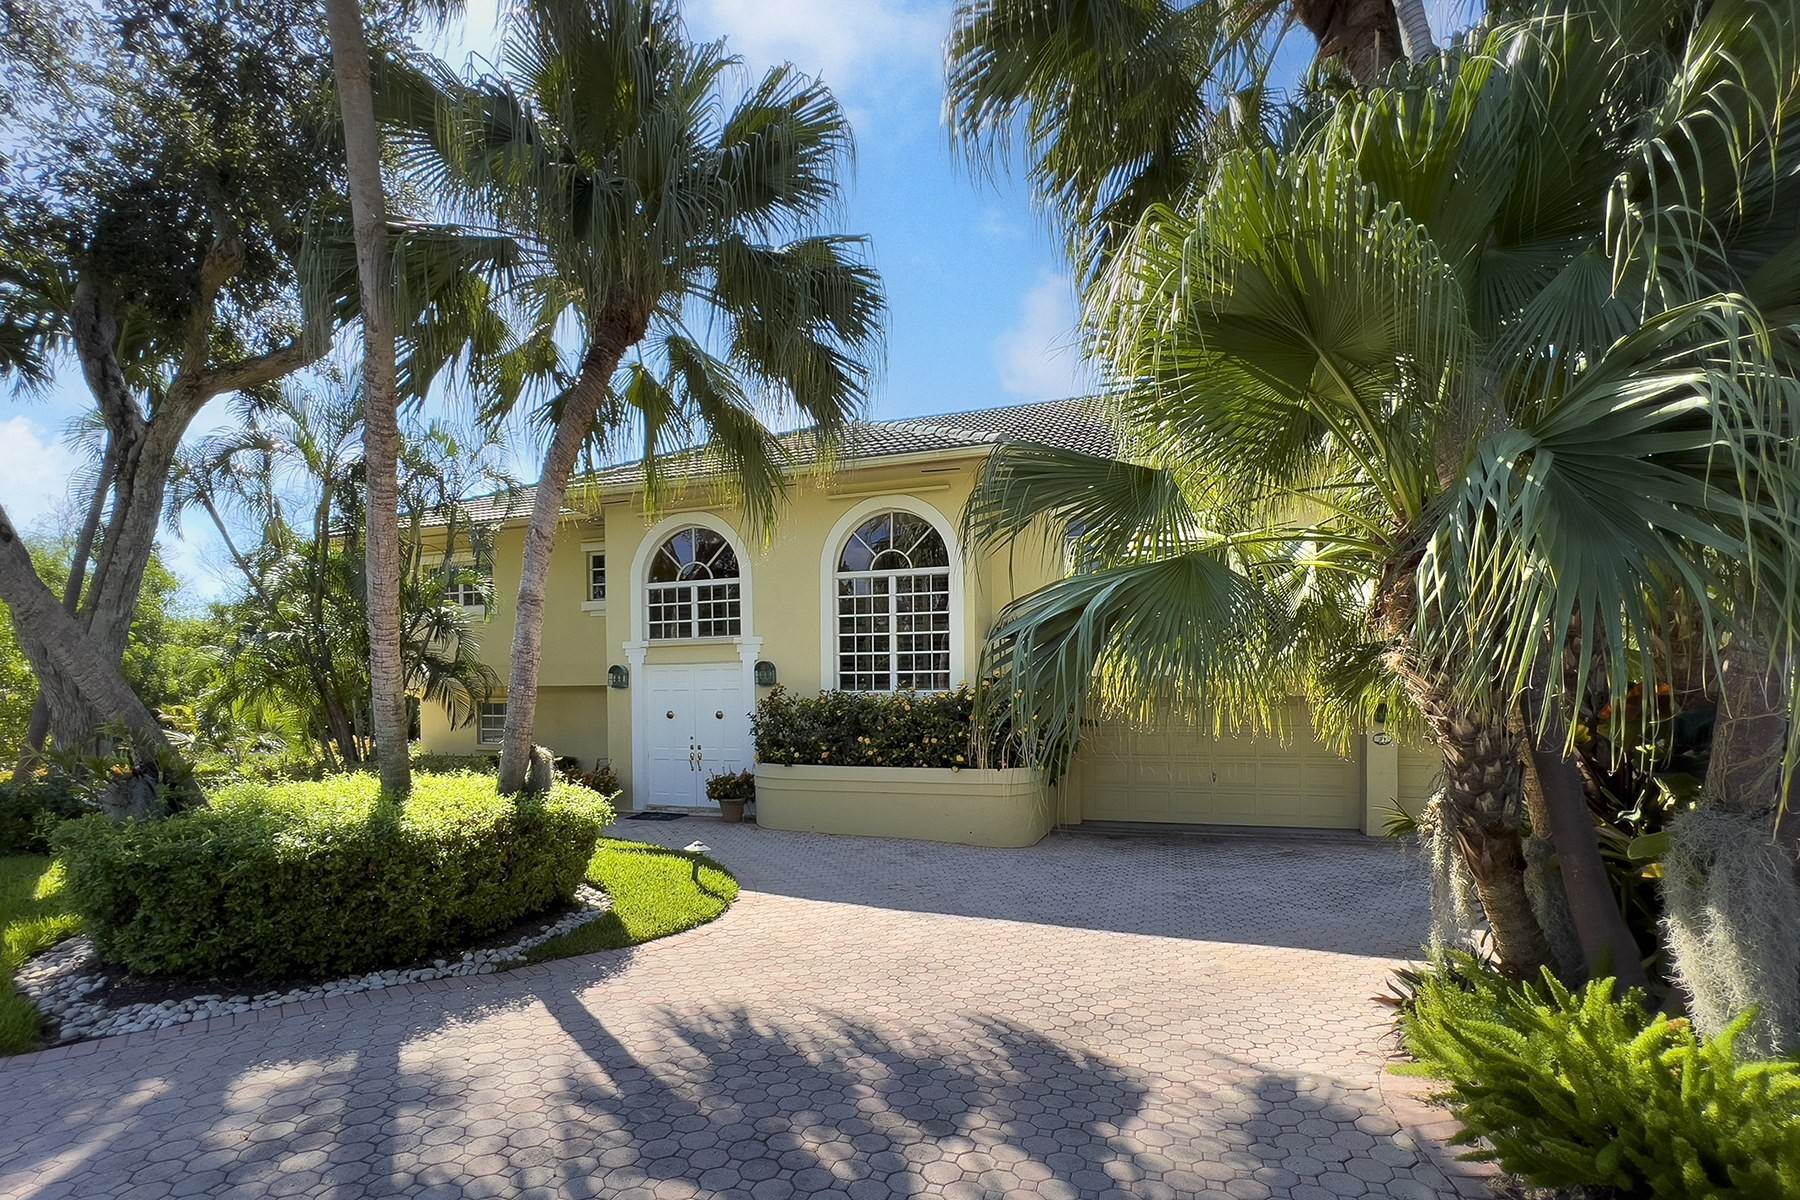 Single Family Homes for Sale at 3 Bayberry Lane, Key Largo, FL 3 Bayberry Lane, Key Largo, FL, Key Largo, Florida 33037 United States